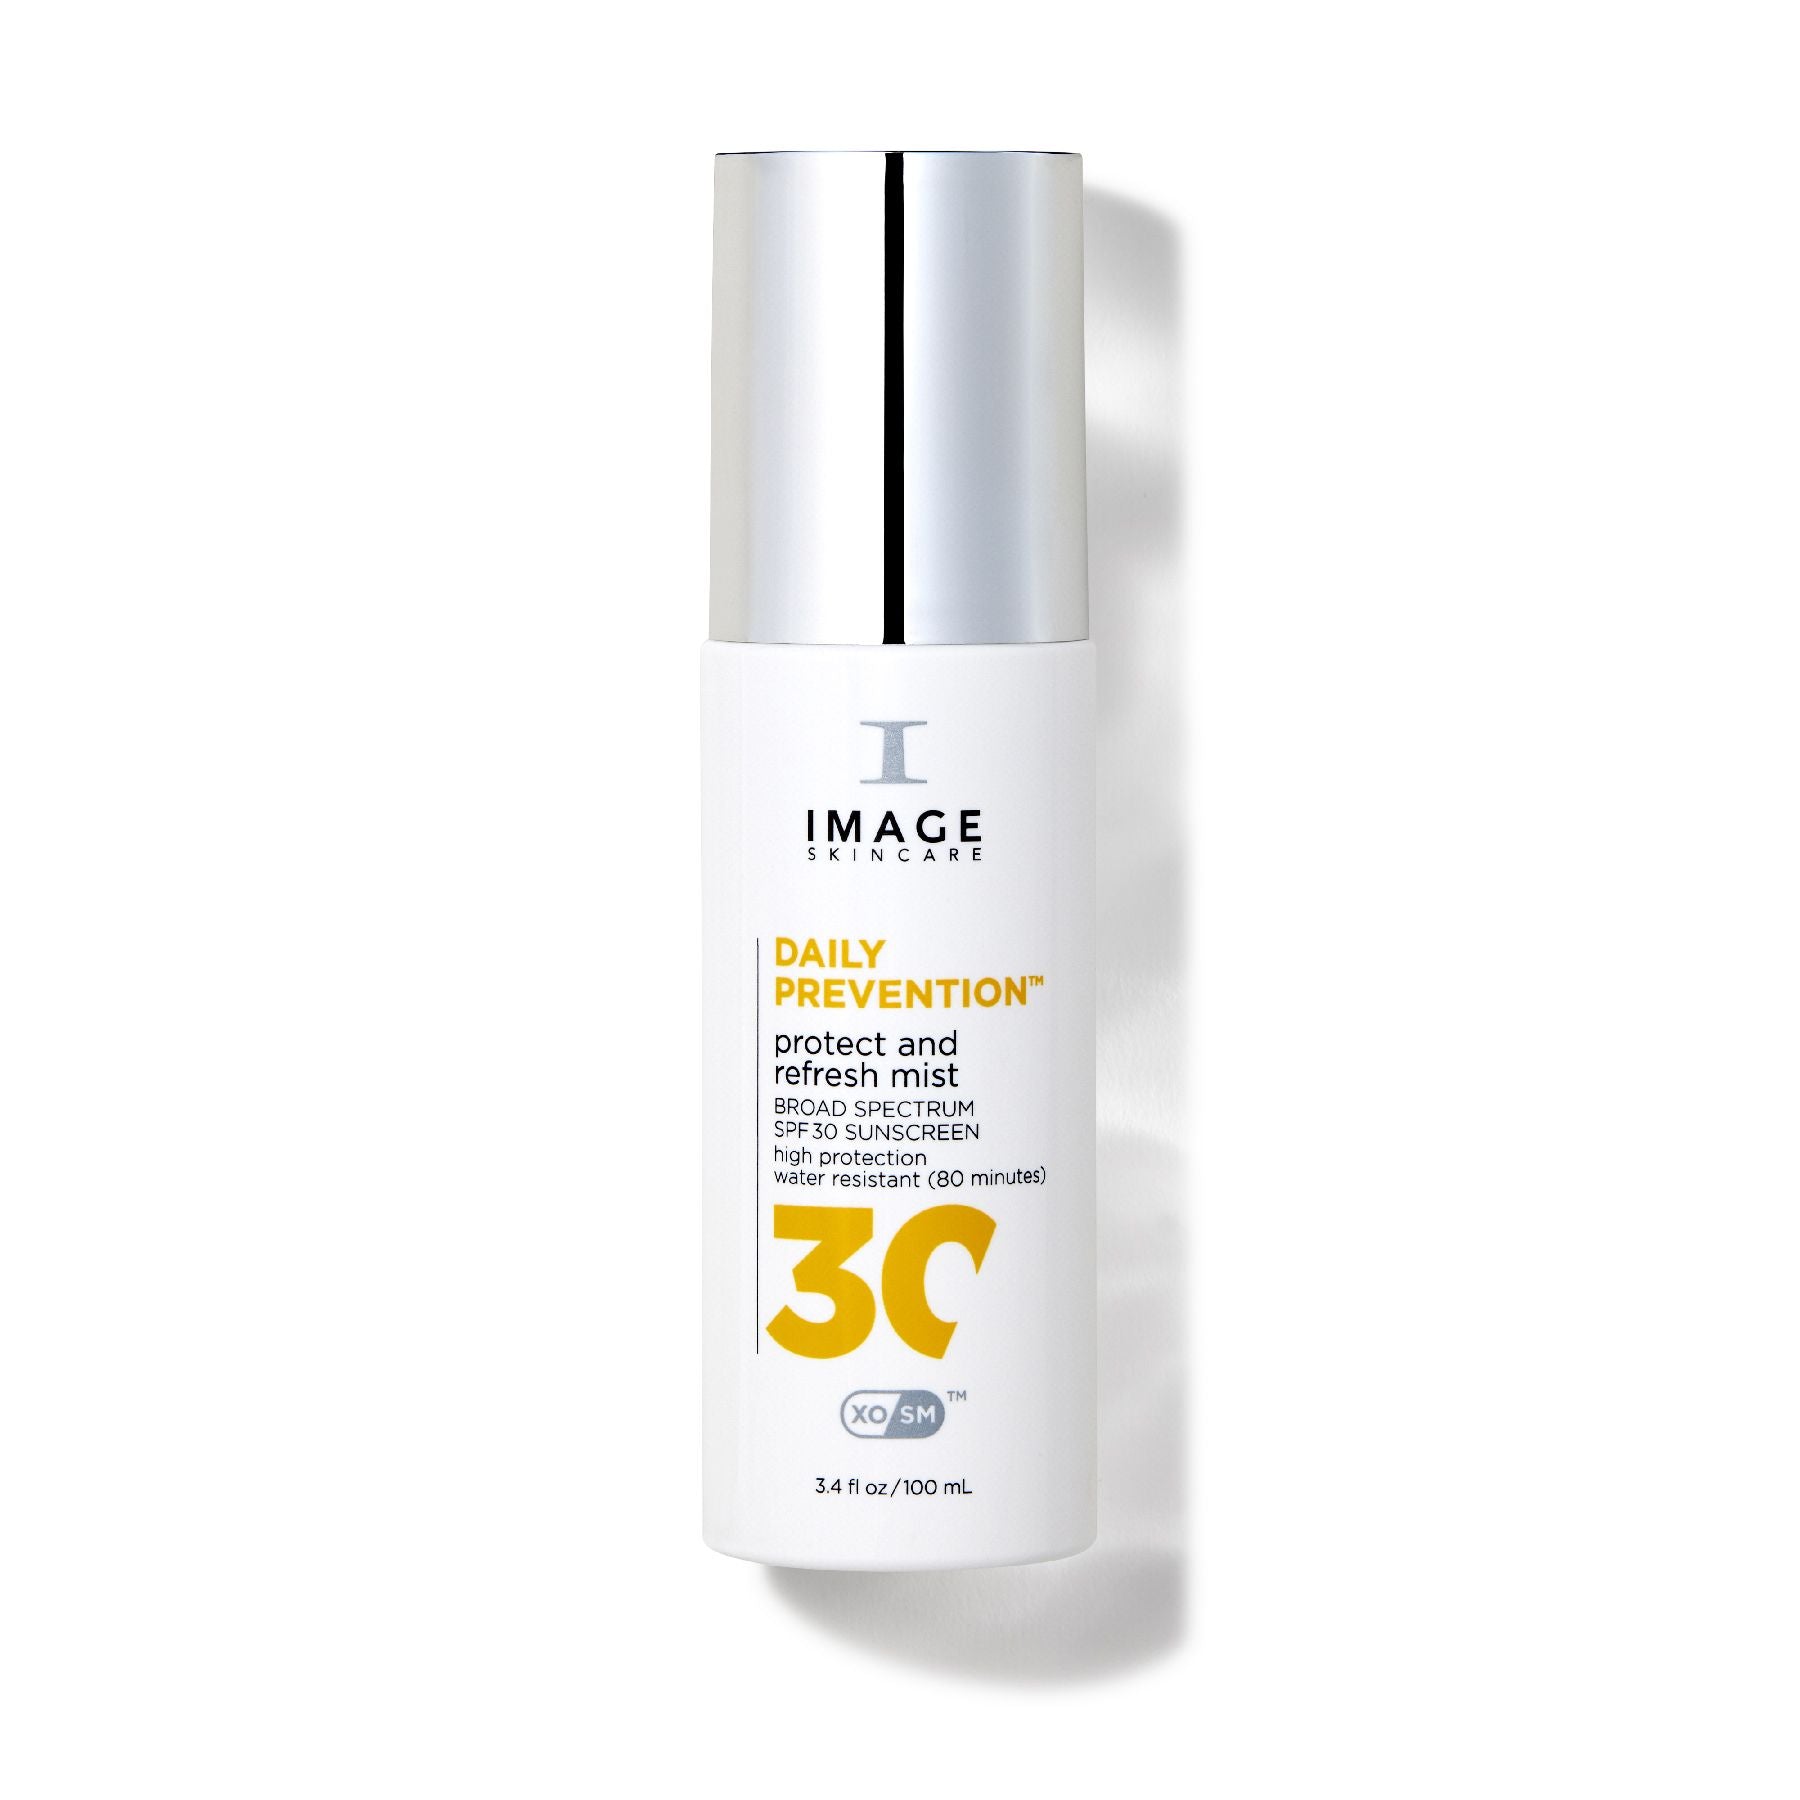 IMAGE SKINCARE DAILY PREVENTION Protect and Refresh Mist SPF 30